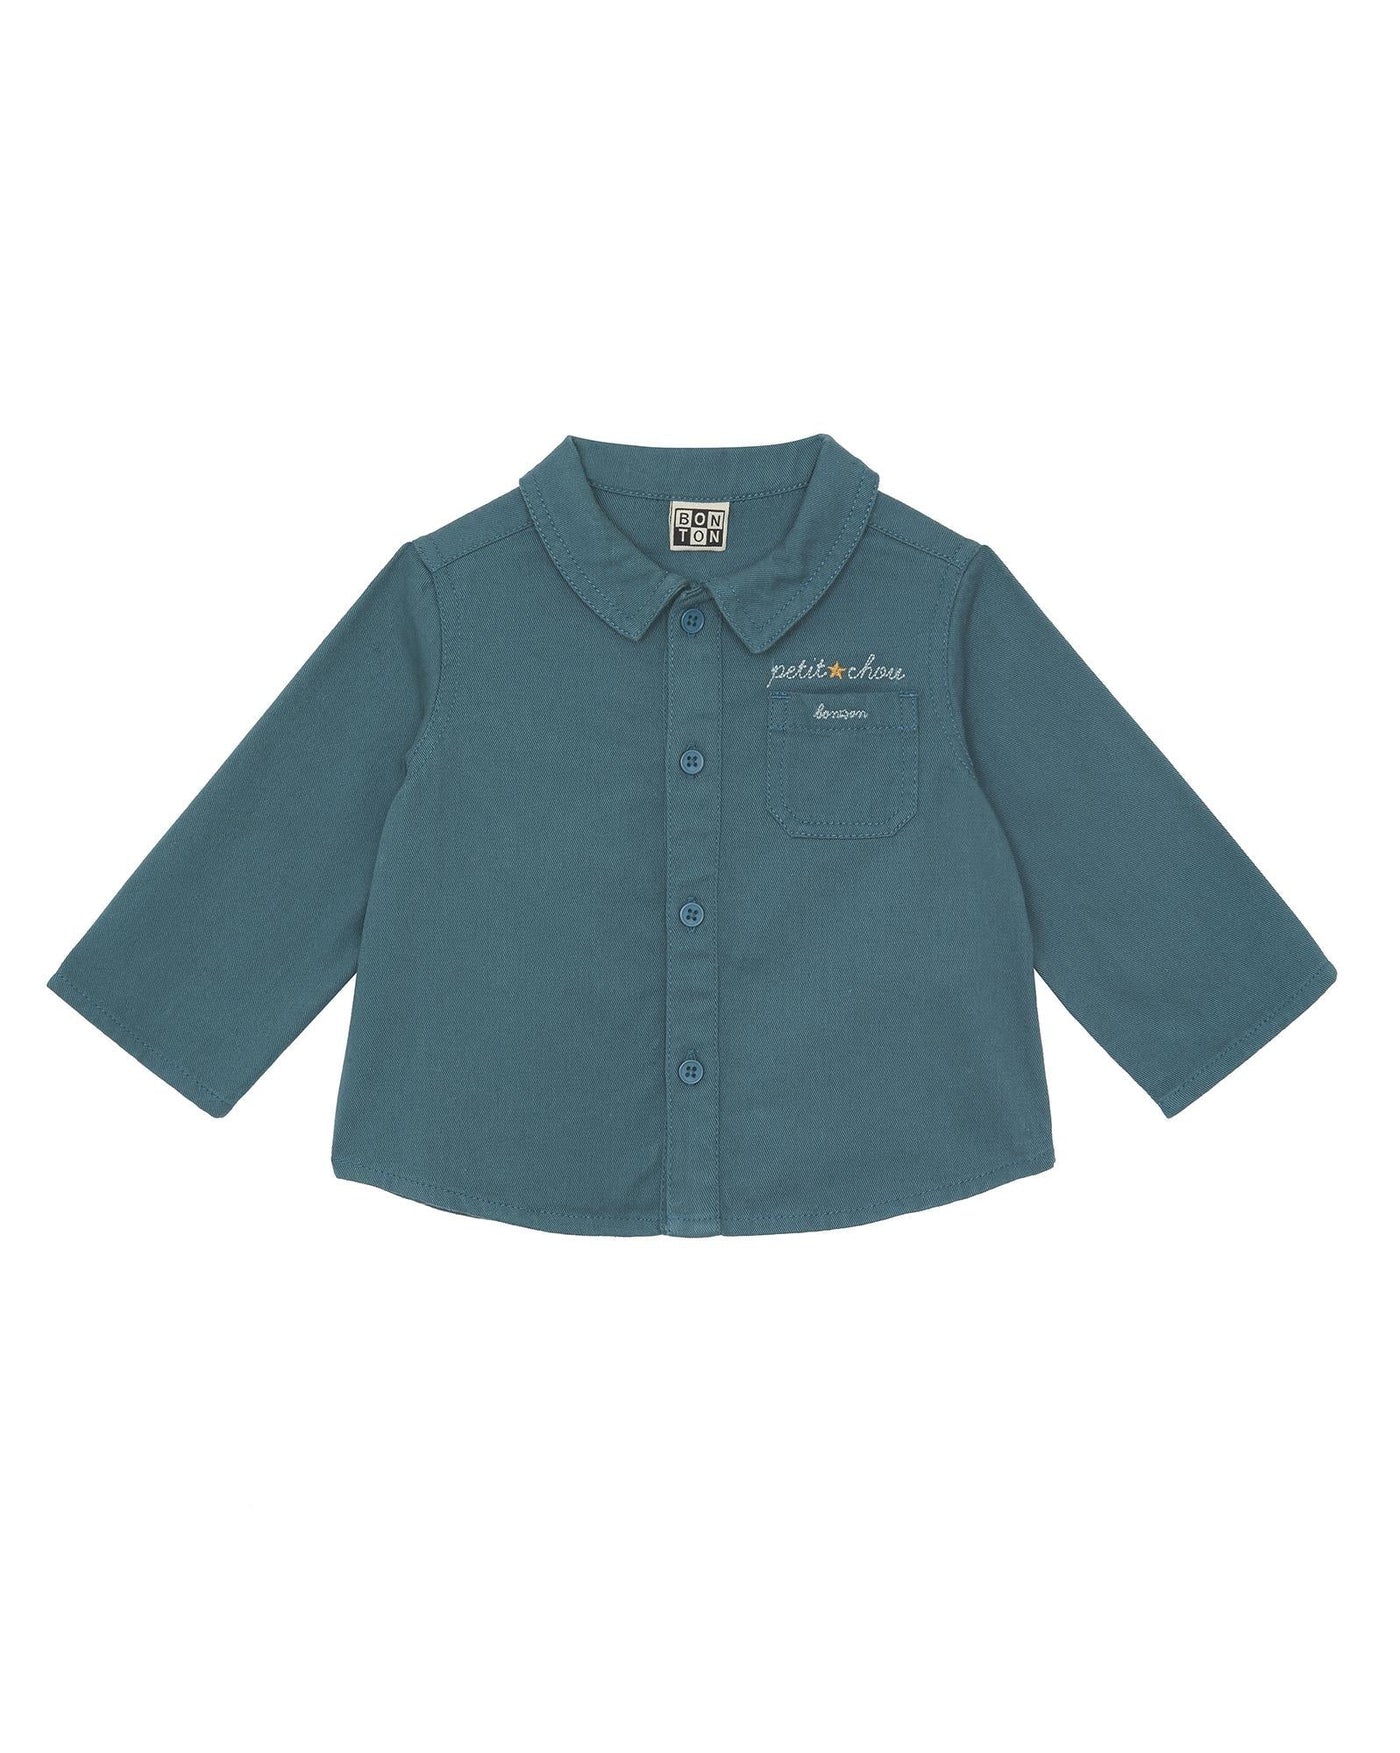 Brushed Cotton Twill Baby Shirt in River Green